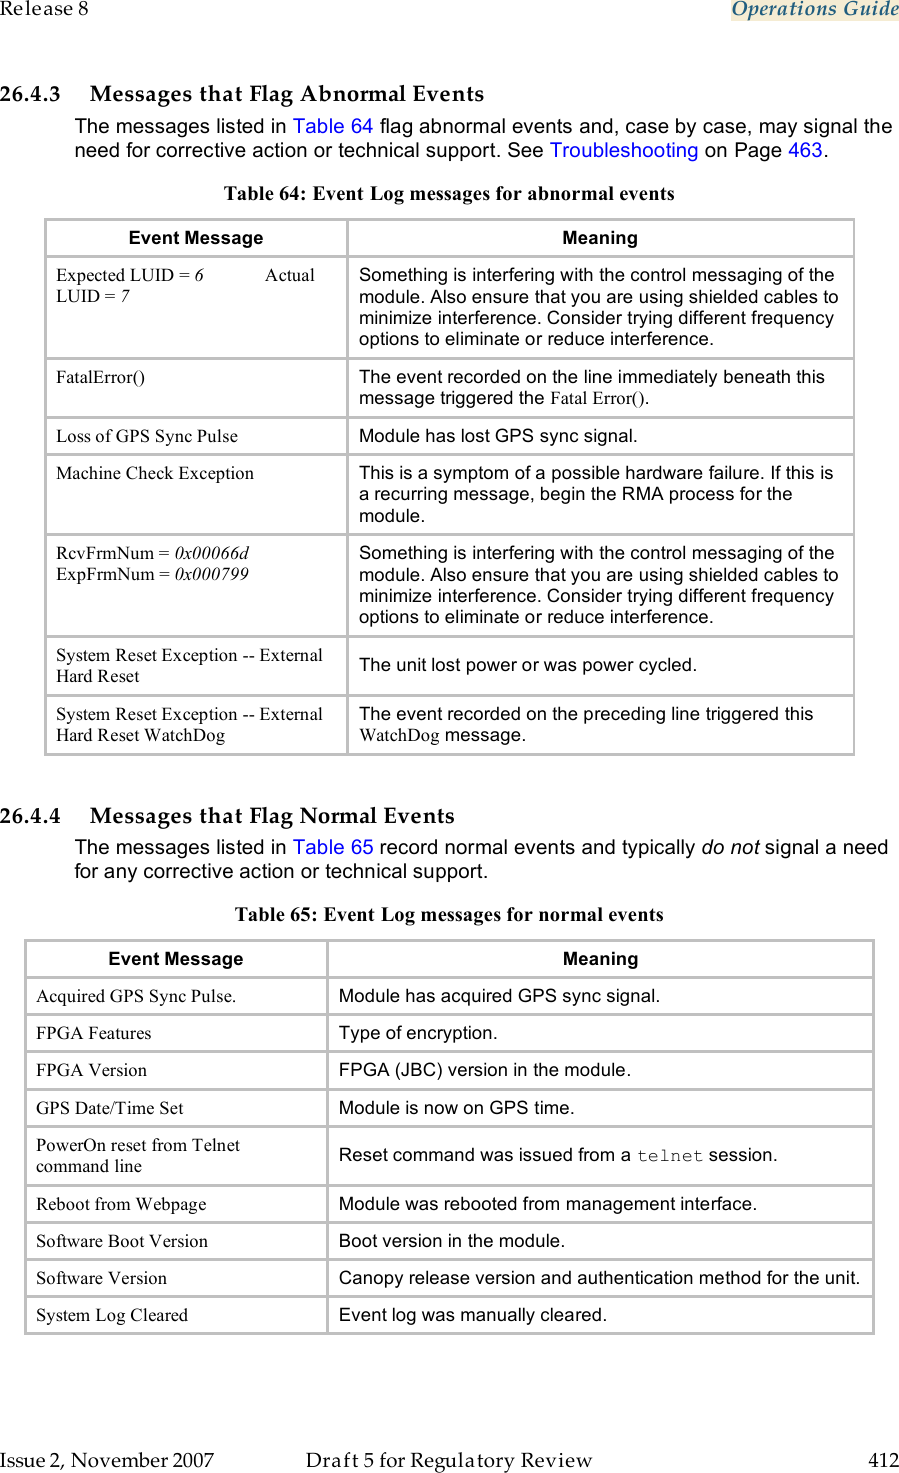 Release 8    Operations Guide   Issue 2, November 2007  Draft 5 for Regulatory Review  412     26.4.3 Messages that Flag Abnormal Events The messages listed in Table 64 flag abnormal events and, case by case, may signal the need for corrective action or technical support. See Troubleshooting on Page 463. Table 64: Event Log messages for abnormal events Event Message Meaning Expected LUID = 6             Actual LUID = 7 Something is interfering with the control messaging of the module. Also ensure that you are using shielded cables to minimize interference. Consider trying different frequency options to eliminate or reduce interference. FatalError() The event recorded on the line immediately beneath this message triggered the Fatal Error(). Loss of GPS Sync Pulse Module has lost GPS sync signal. Machine Check Exception This is a symptom of a possible hardware failure. If this is a recurring message, begin the RMA process for the module. RcvFrmNum = 0x00066d ExpFrmNum = 0x000799 Something is interfering with the control messaging of the module. Also ensure that you are using shielded cables to minimize interference. Consider trying different frequency options to eliminate or reduce interference. System Reset Exception -- External Hard Reset The unit lost power or was power cycled. System Reset Exception -- External Hard Reset WatchDog The event recorded on the preceding line triggered this WatchDog message.  26.4.4 Messages that Flag Normal Events The messages listed in Table 65 record normal events and typically do not signal a need for any corrective action or technical support. Table 65: Event Log messages for normal events Event Message Meaning Acquired GPS Sync Pulse. Module has acquired GPS sync signal. FPGA Features Type of encryption. FPGA Version FPGA (JBC) version in the module. GPS Date/Time Set Module is now on GPS time. PowerOn reset from Telnet command line Reset command was issued from a telnet session. Reboot from Webpage Module was rebooted from management interface. Software Boot Version Boot version in the module. Software Version Canopy release version and authentication method for the unit. System Log Cleared Event log was manually cleared.  